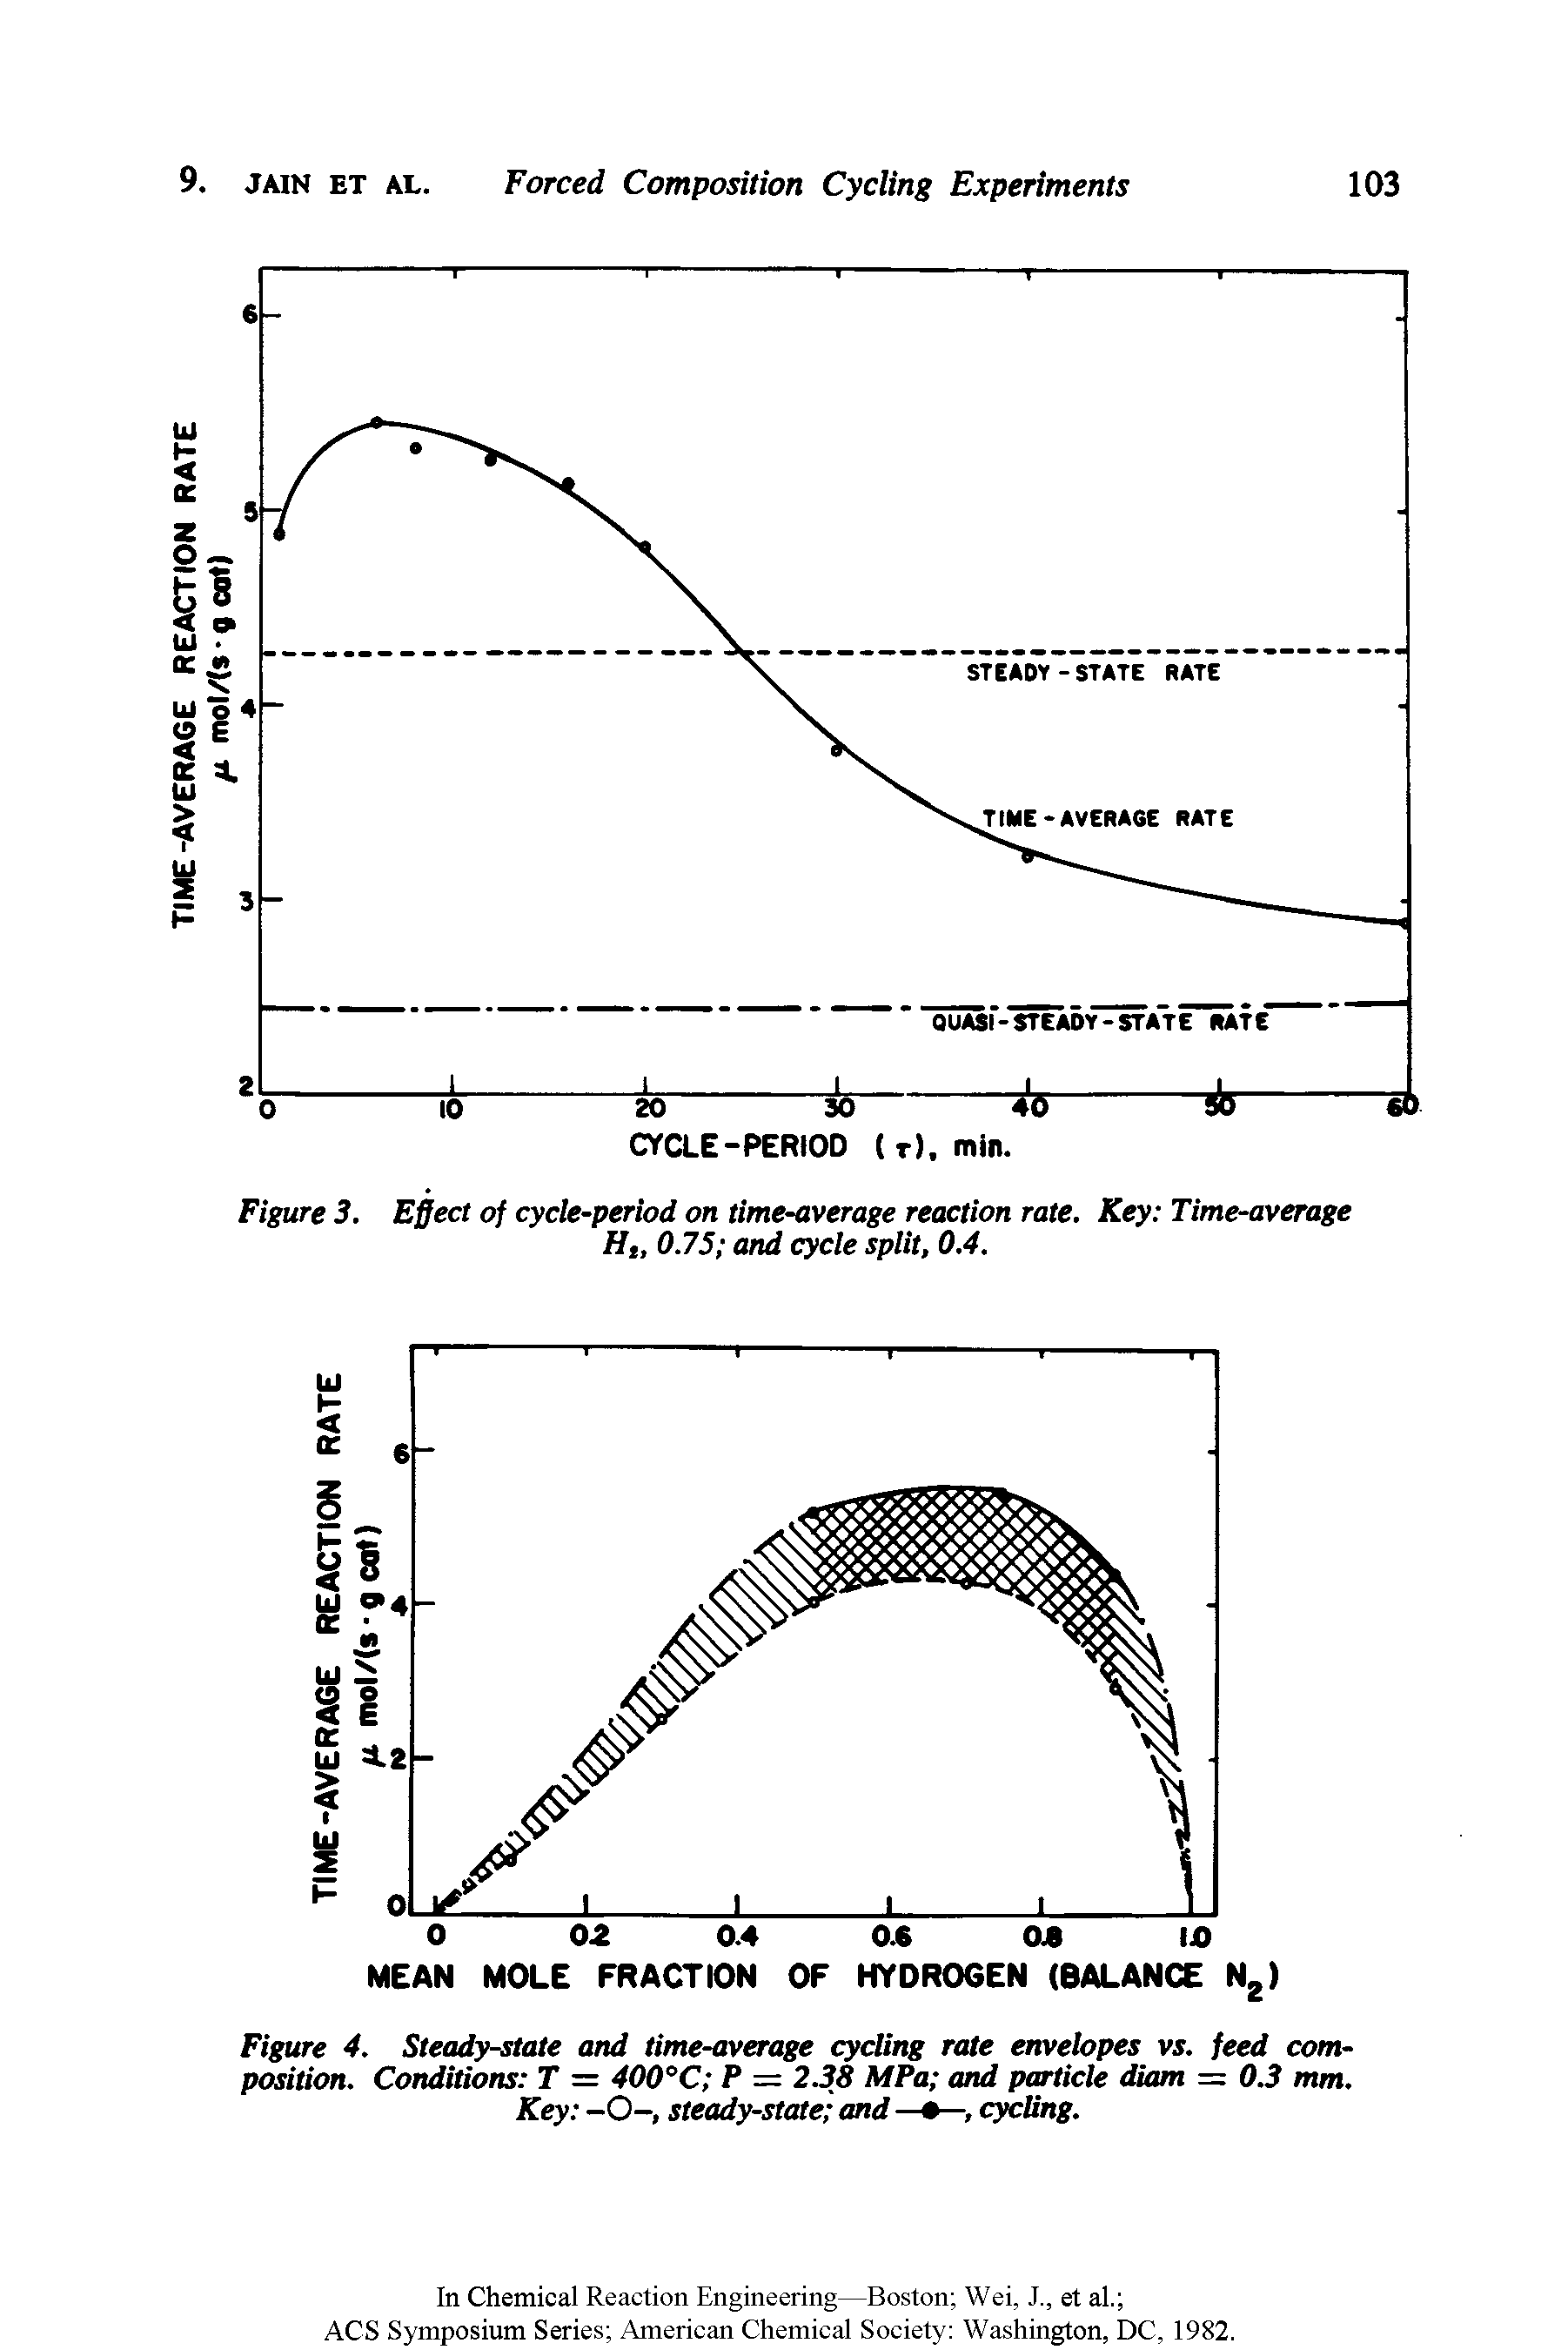 Figure 3. Effect of cycle-period on time-average reaction rate. Key Time-average Ht, 0.75 and cycle split, 0.4.